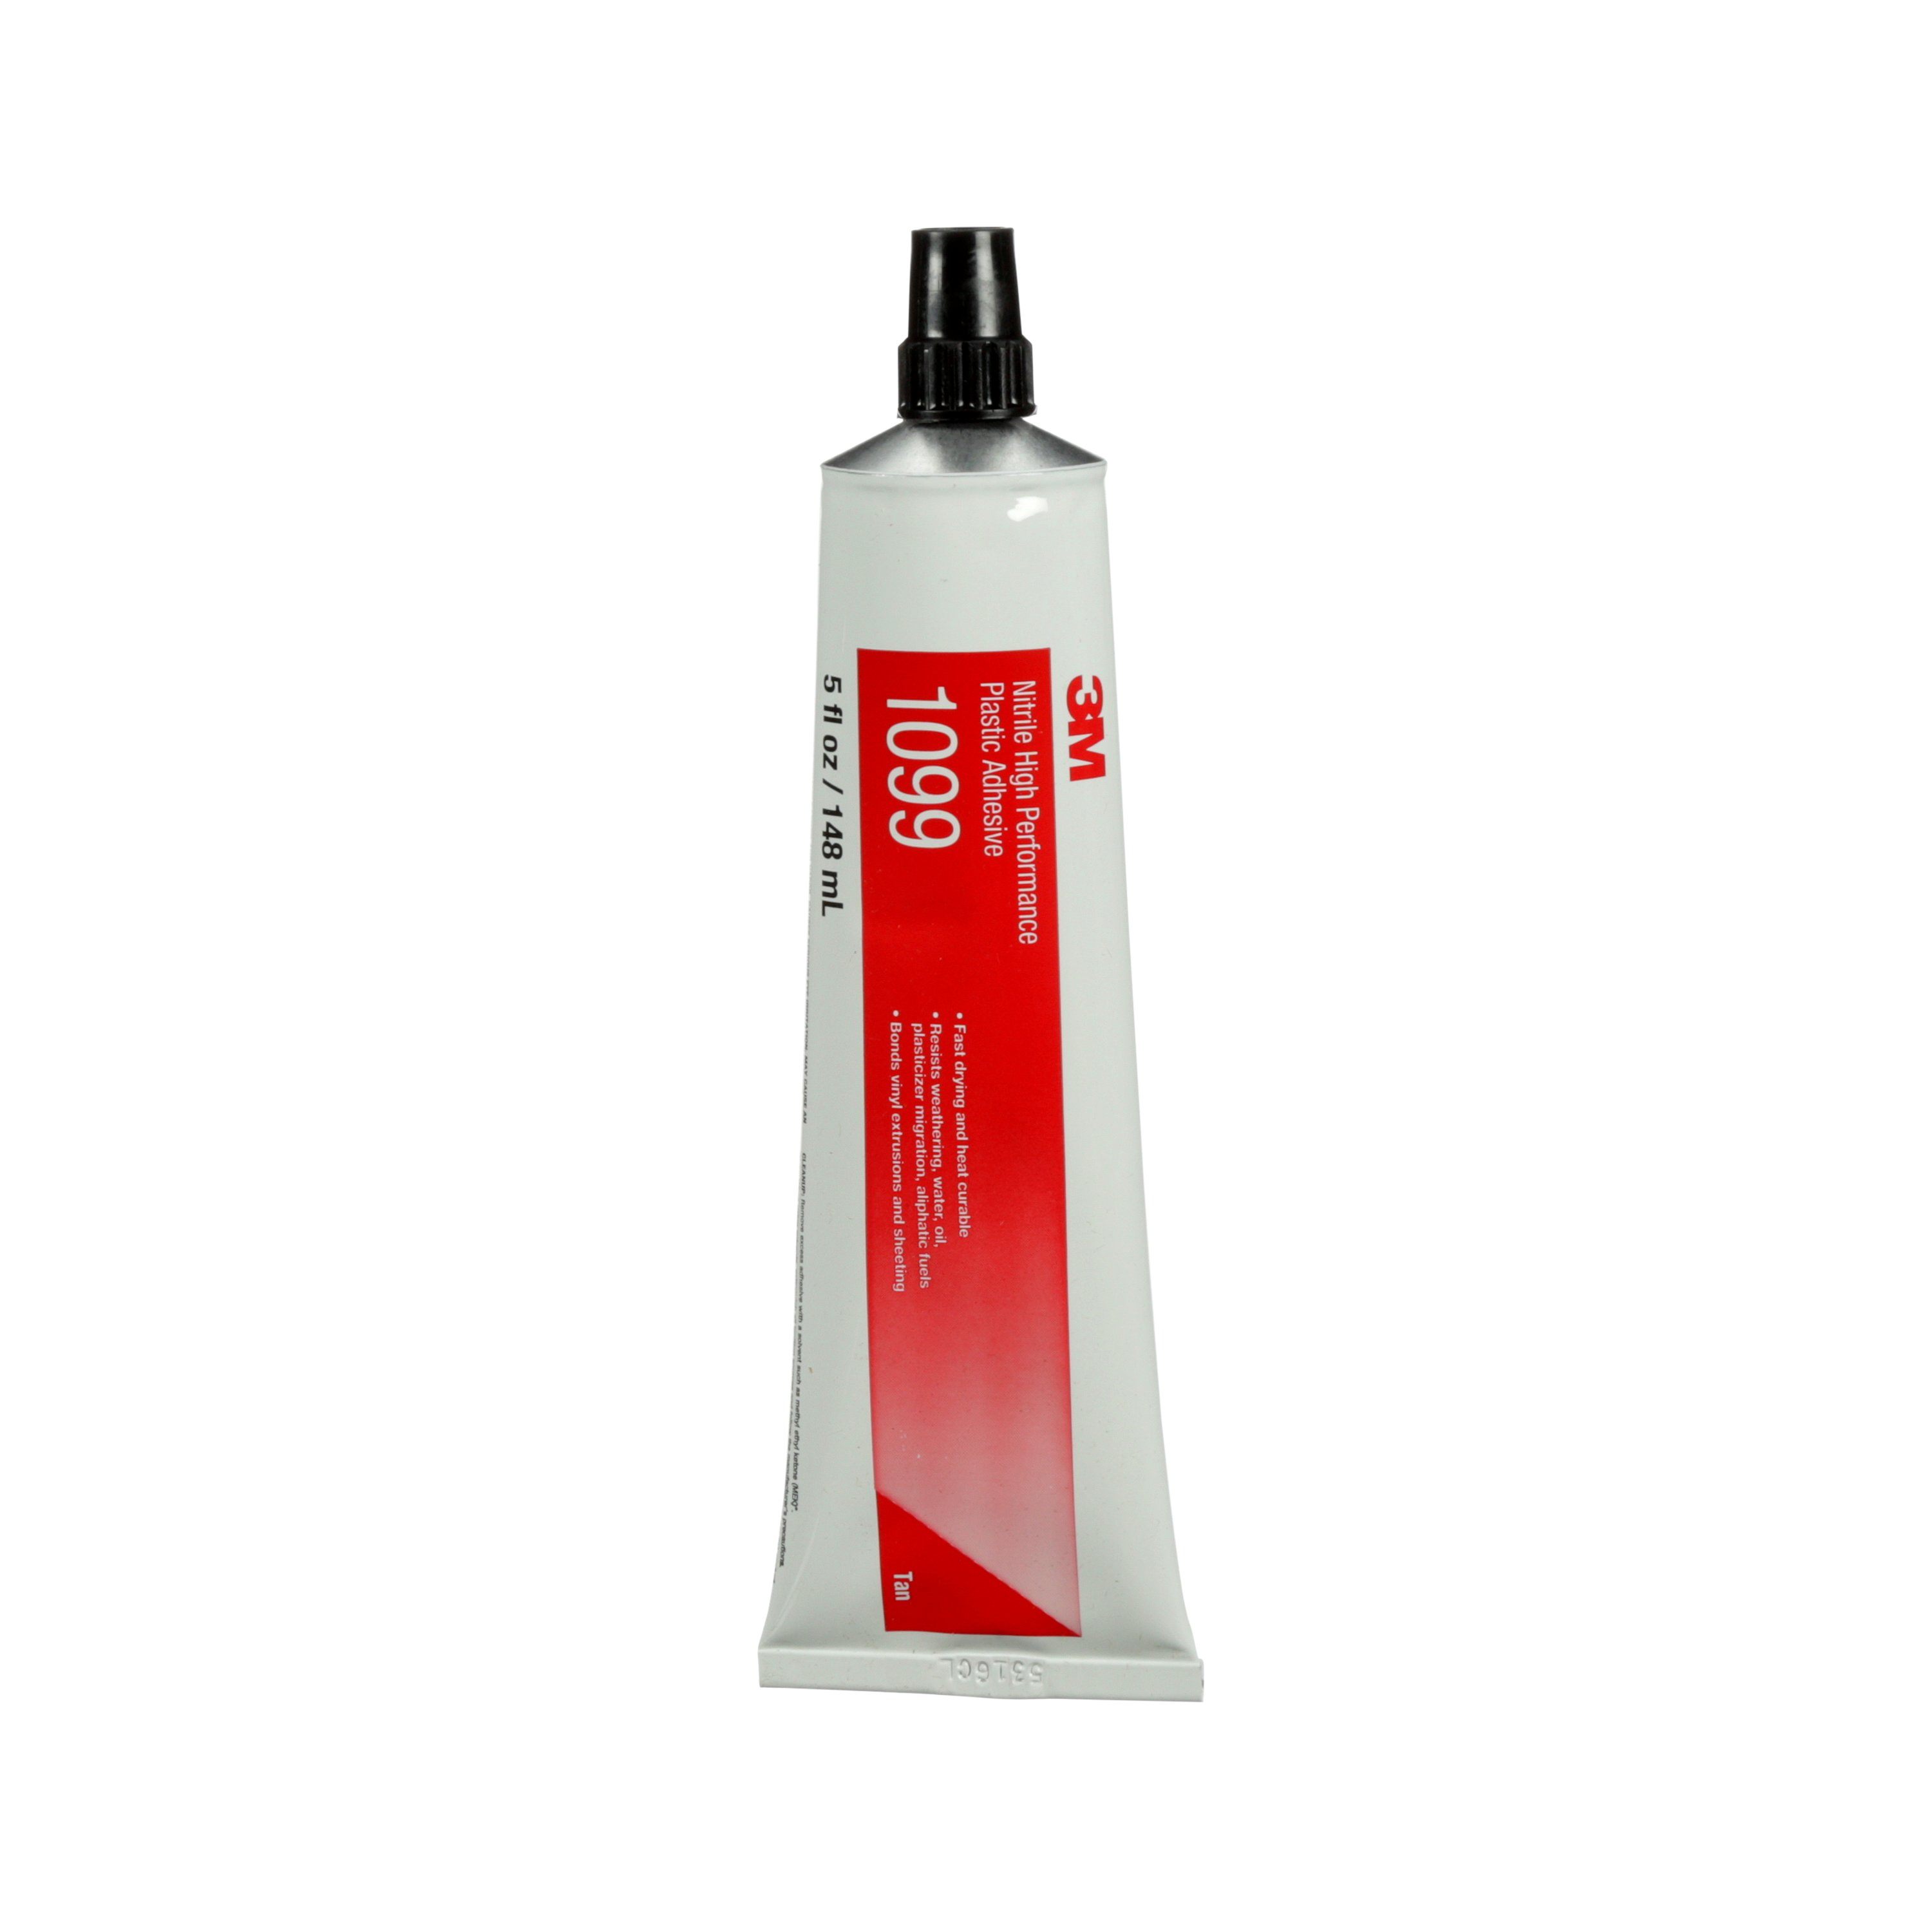 3M™ Plastic Adhesive 2262 bonds to a variety of substrates - primarily leather and most vinyl sheeting as used in awnings, upholstery and faux leather - as well as plastics, for a strong, enduring bond.